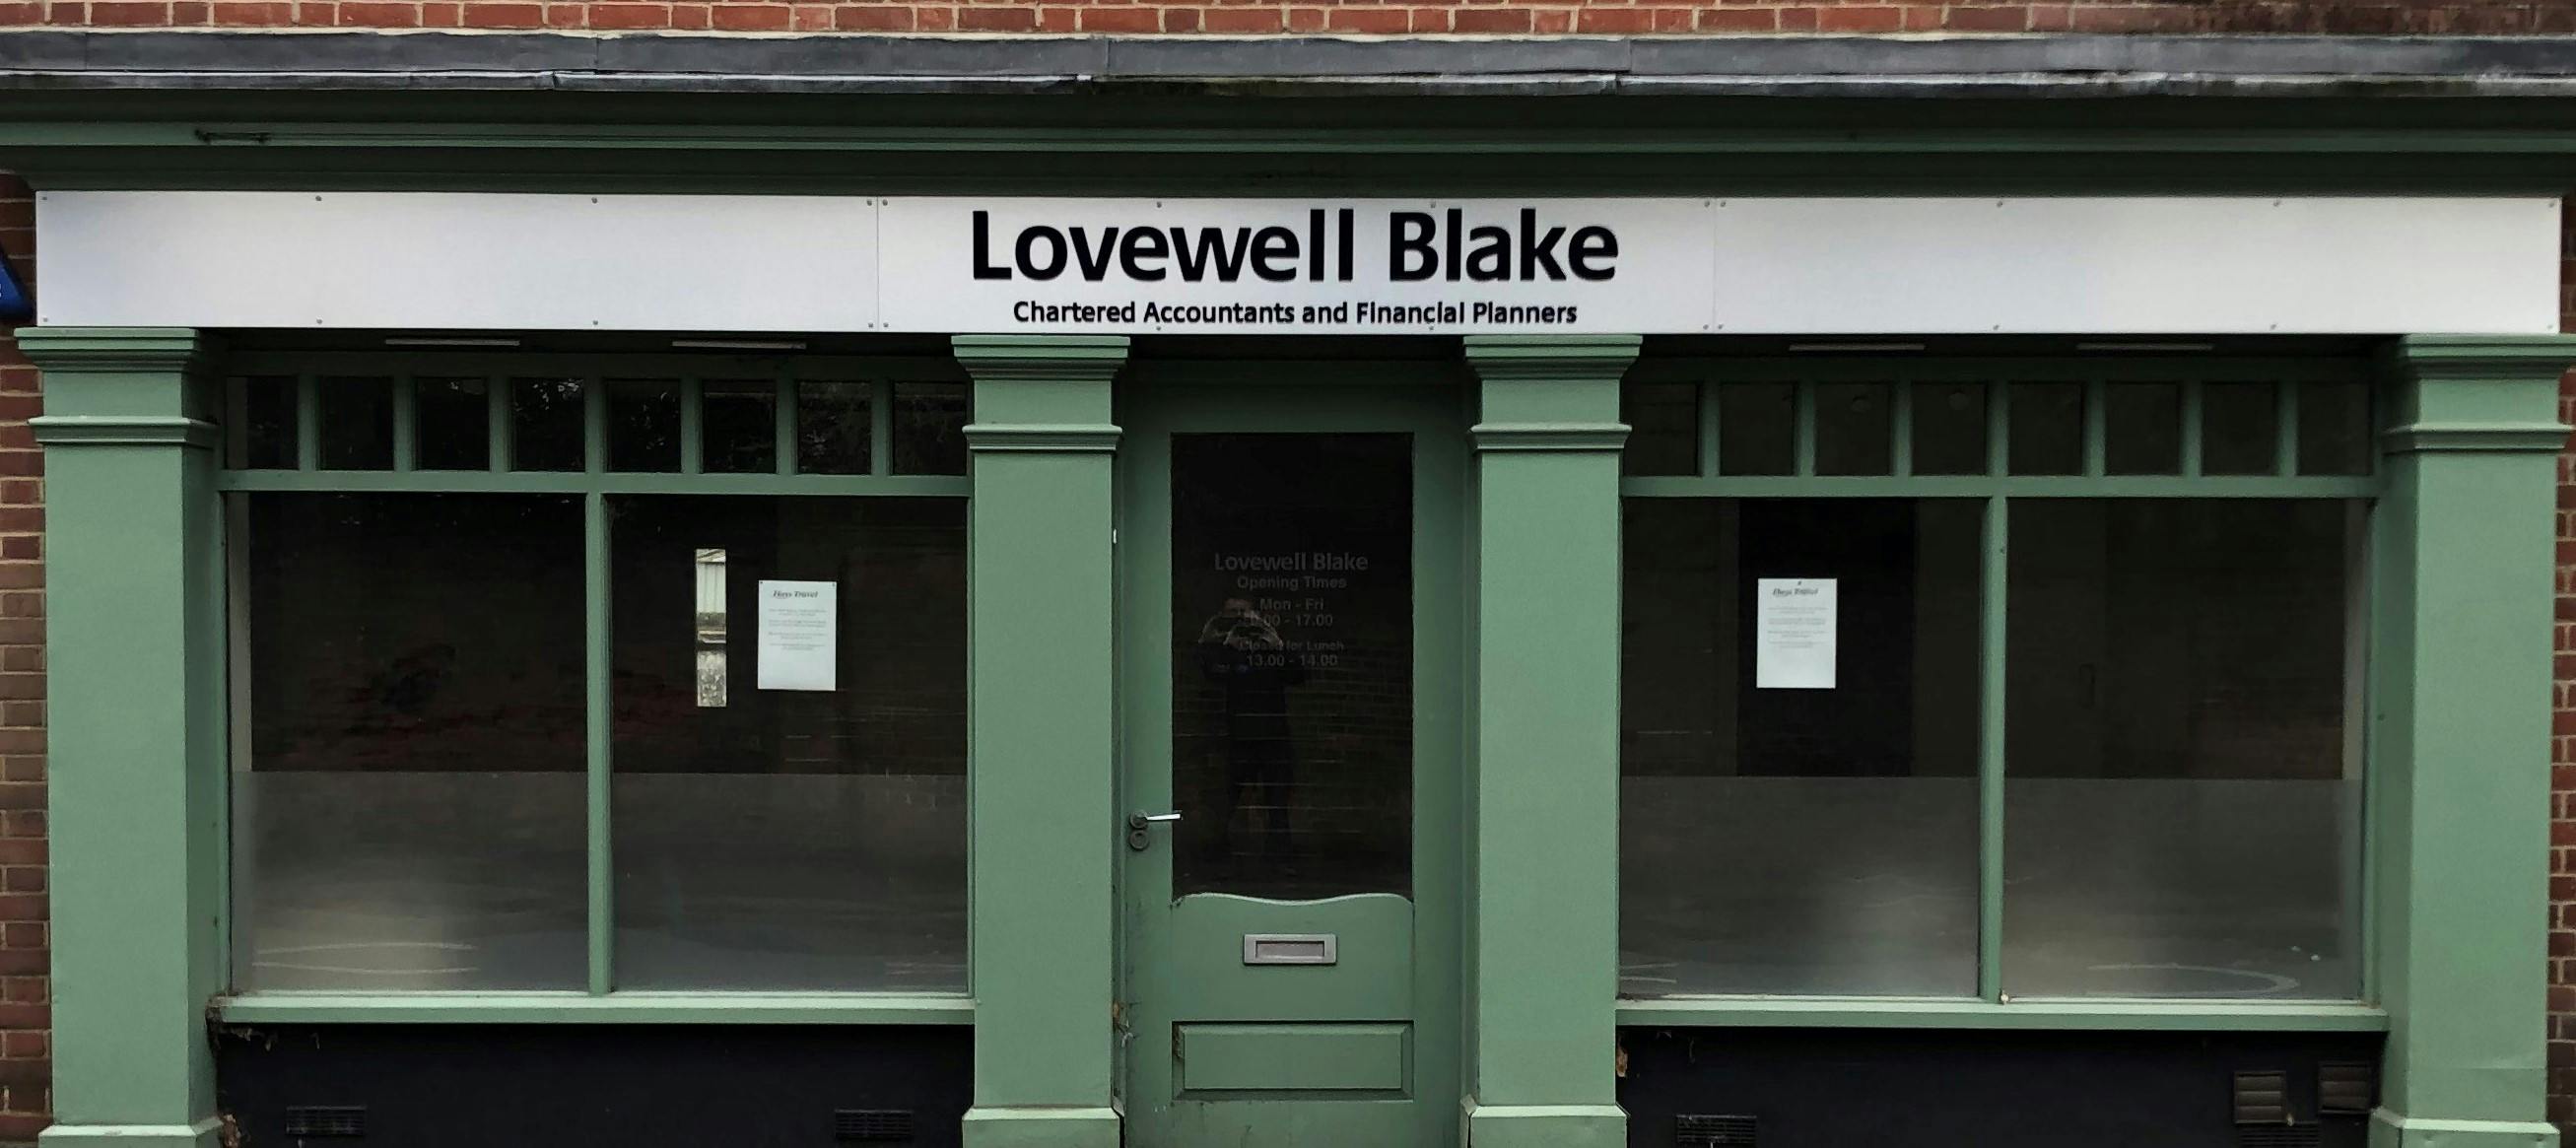 Lovewell Blake Chartered Accountants and Financial Planners - Aylsham Office